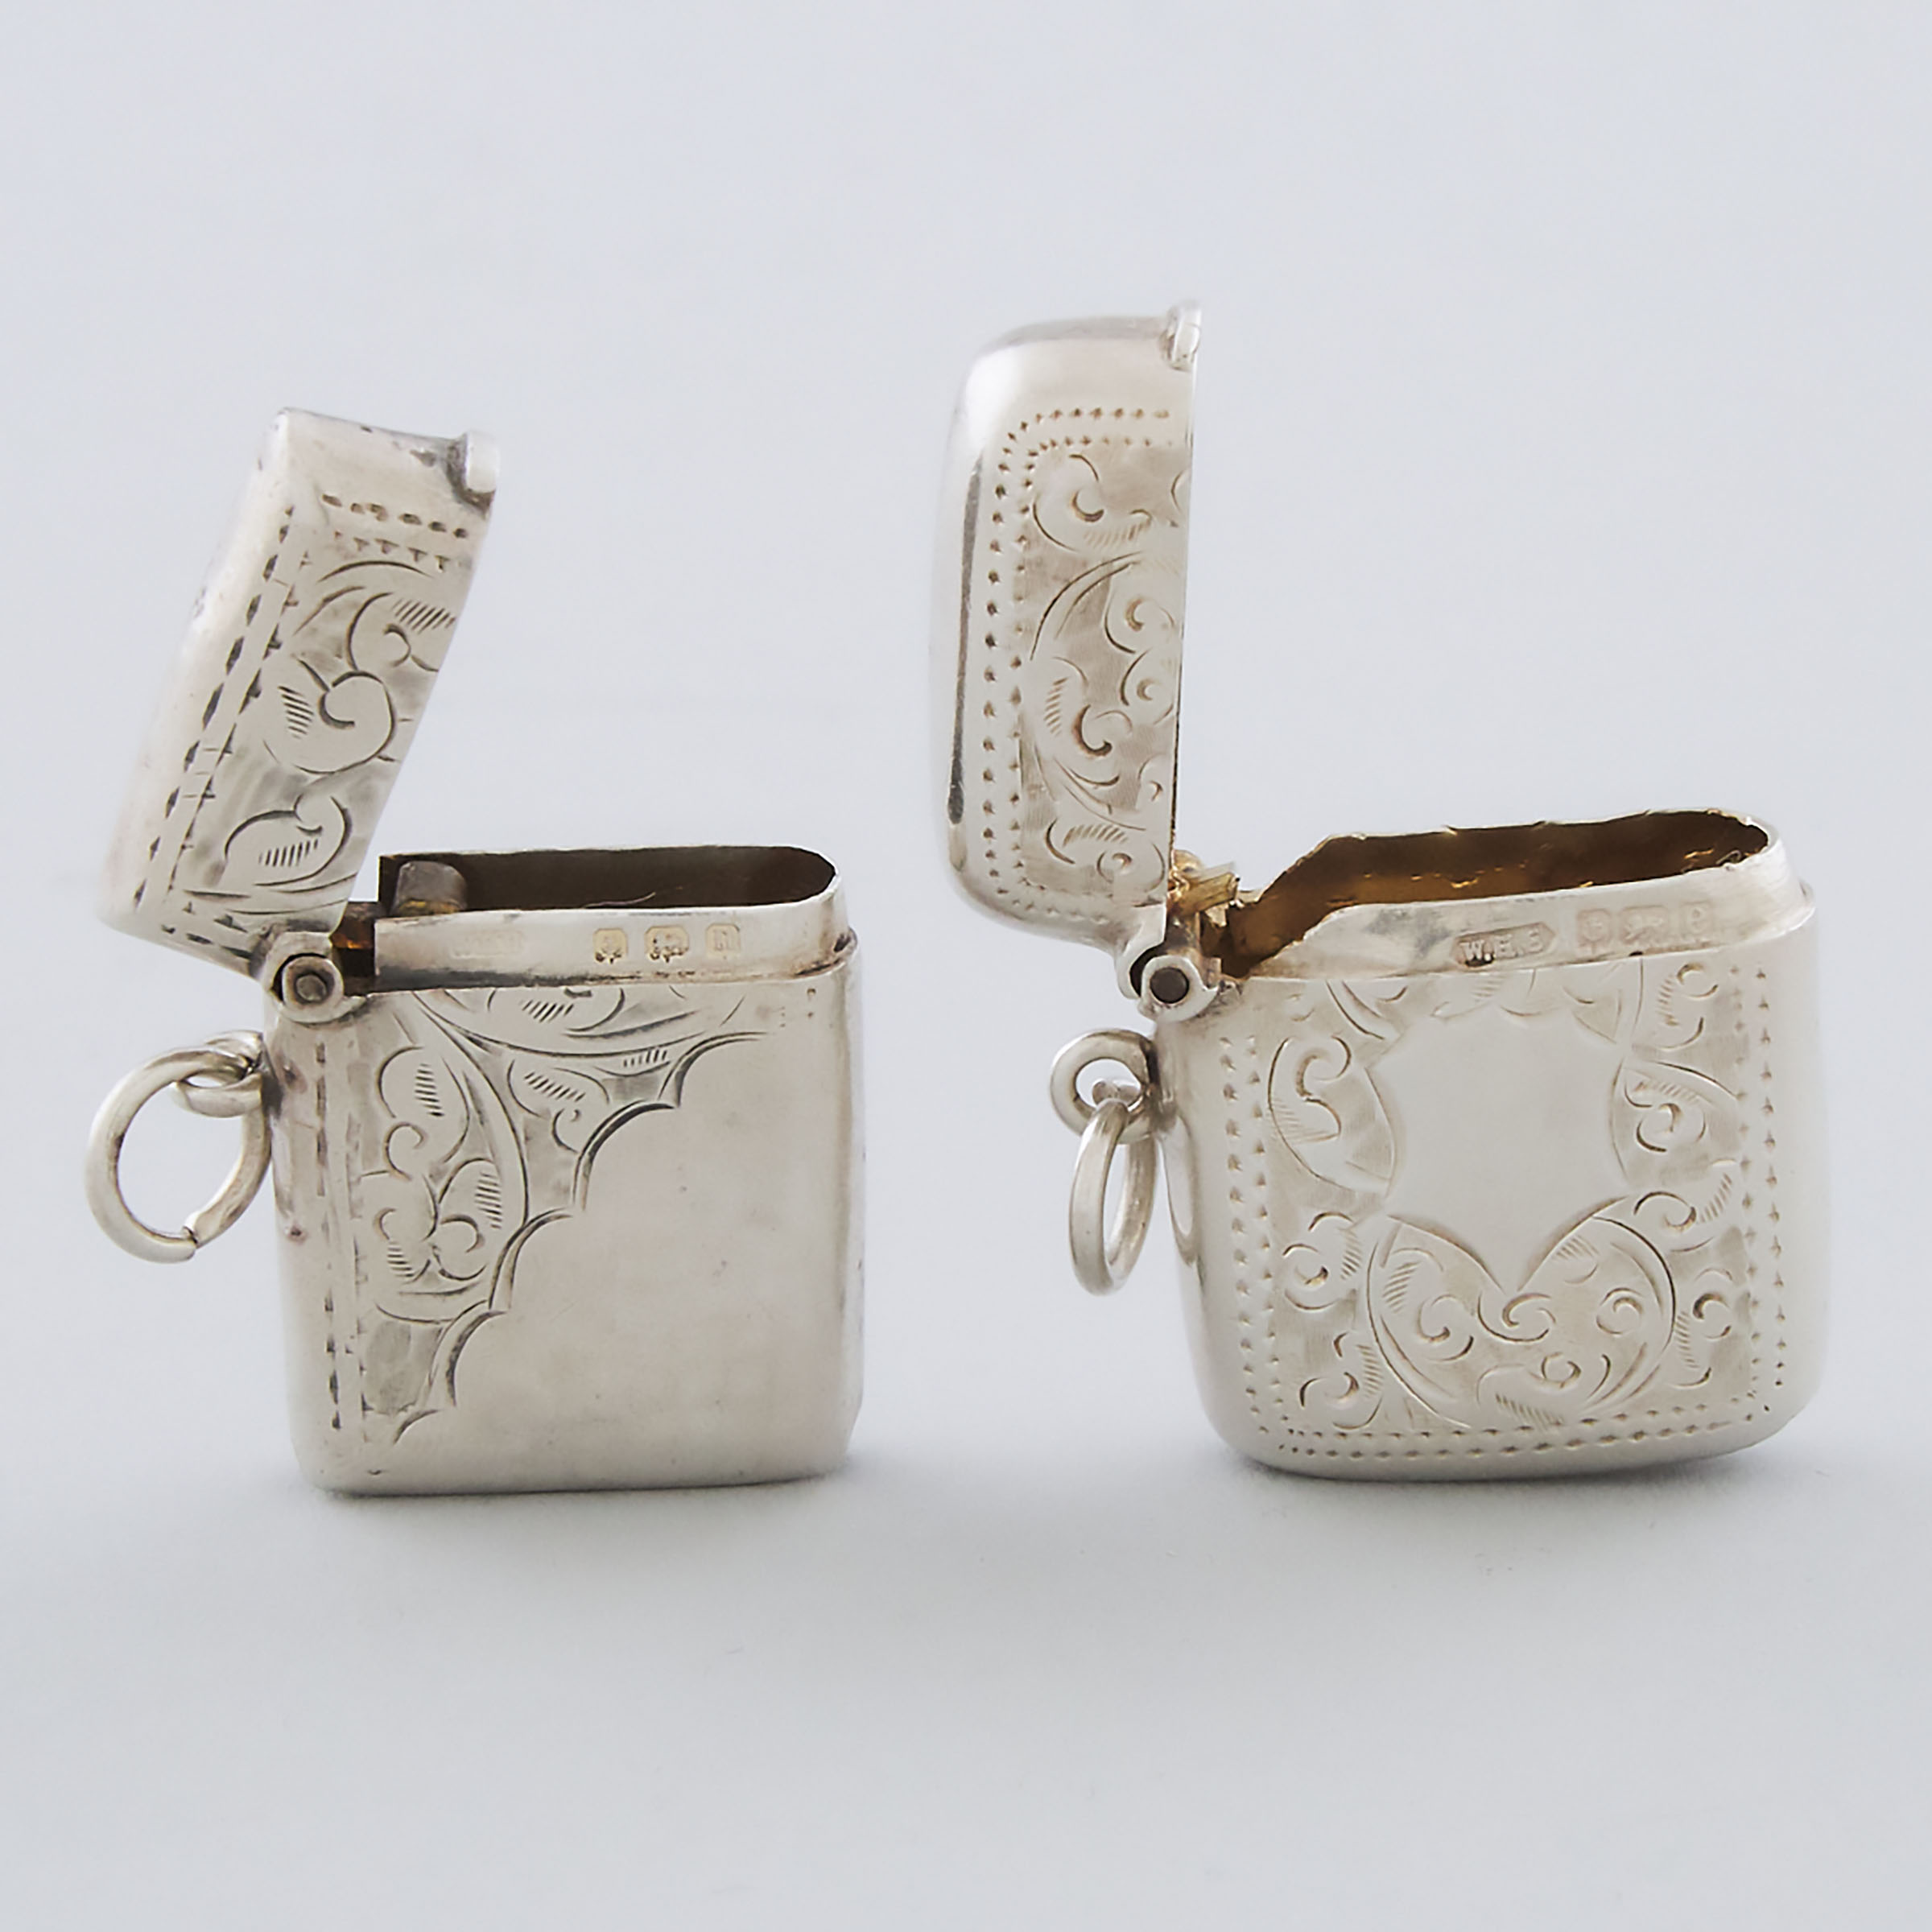 Two Edwardian Silver Vesta Cases, William Henry Sparrow and William Hair Haseler, Birmingham, 1904 and 1912